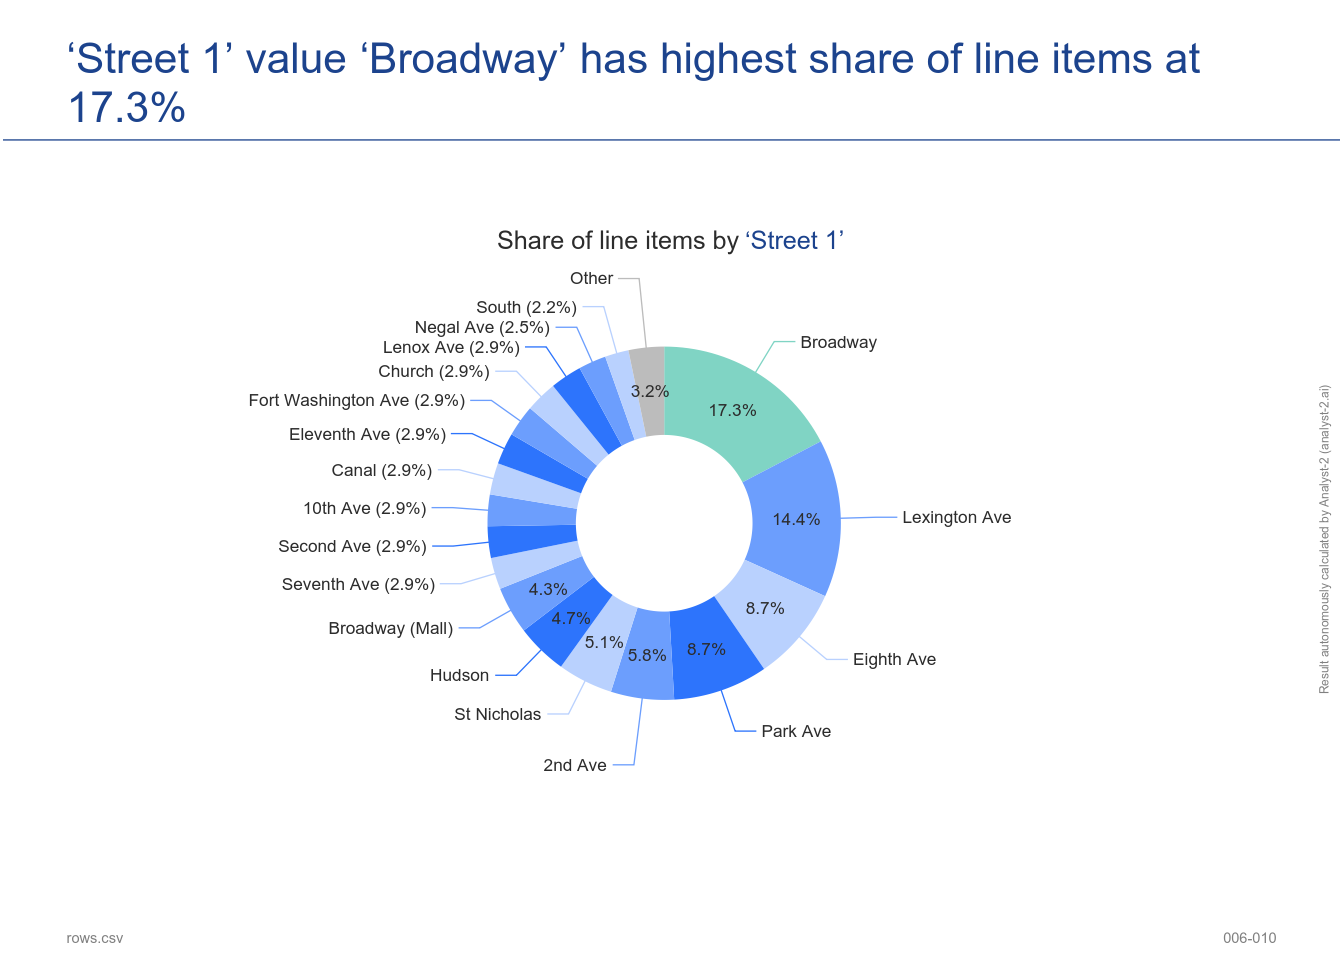 The ‘Street 1’ value ‘Broadway’ has the highest share of line items at 17.3%. (MBPO Pedestrian Ramp Report - 006-010)